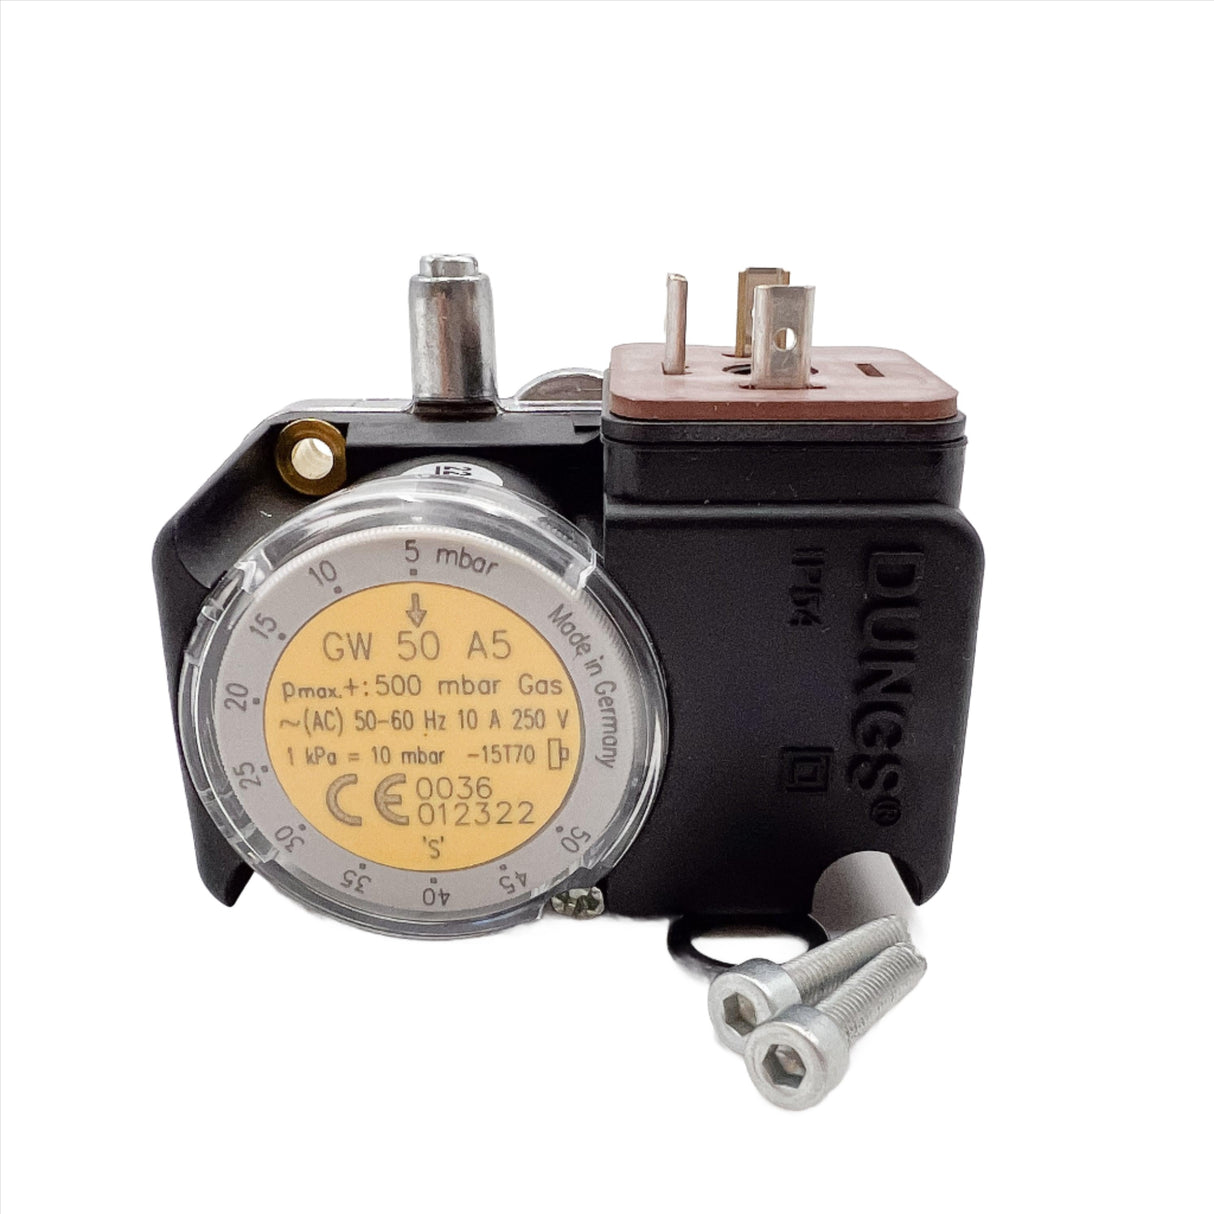 Dungs GW150 A5 5-150 mBar Compact Pressure Switch